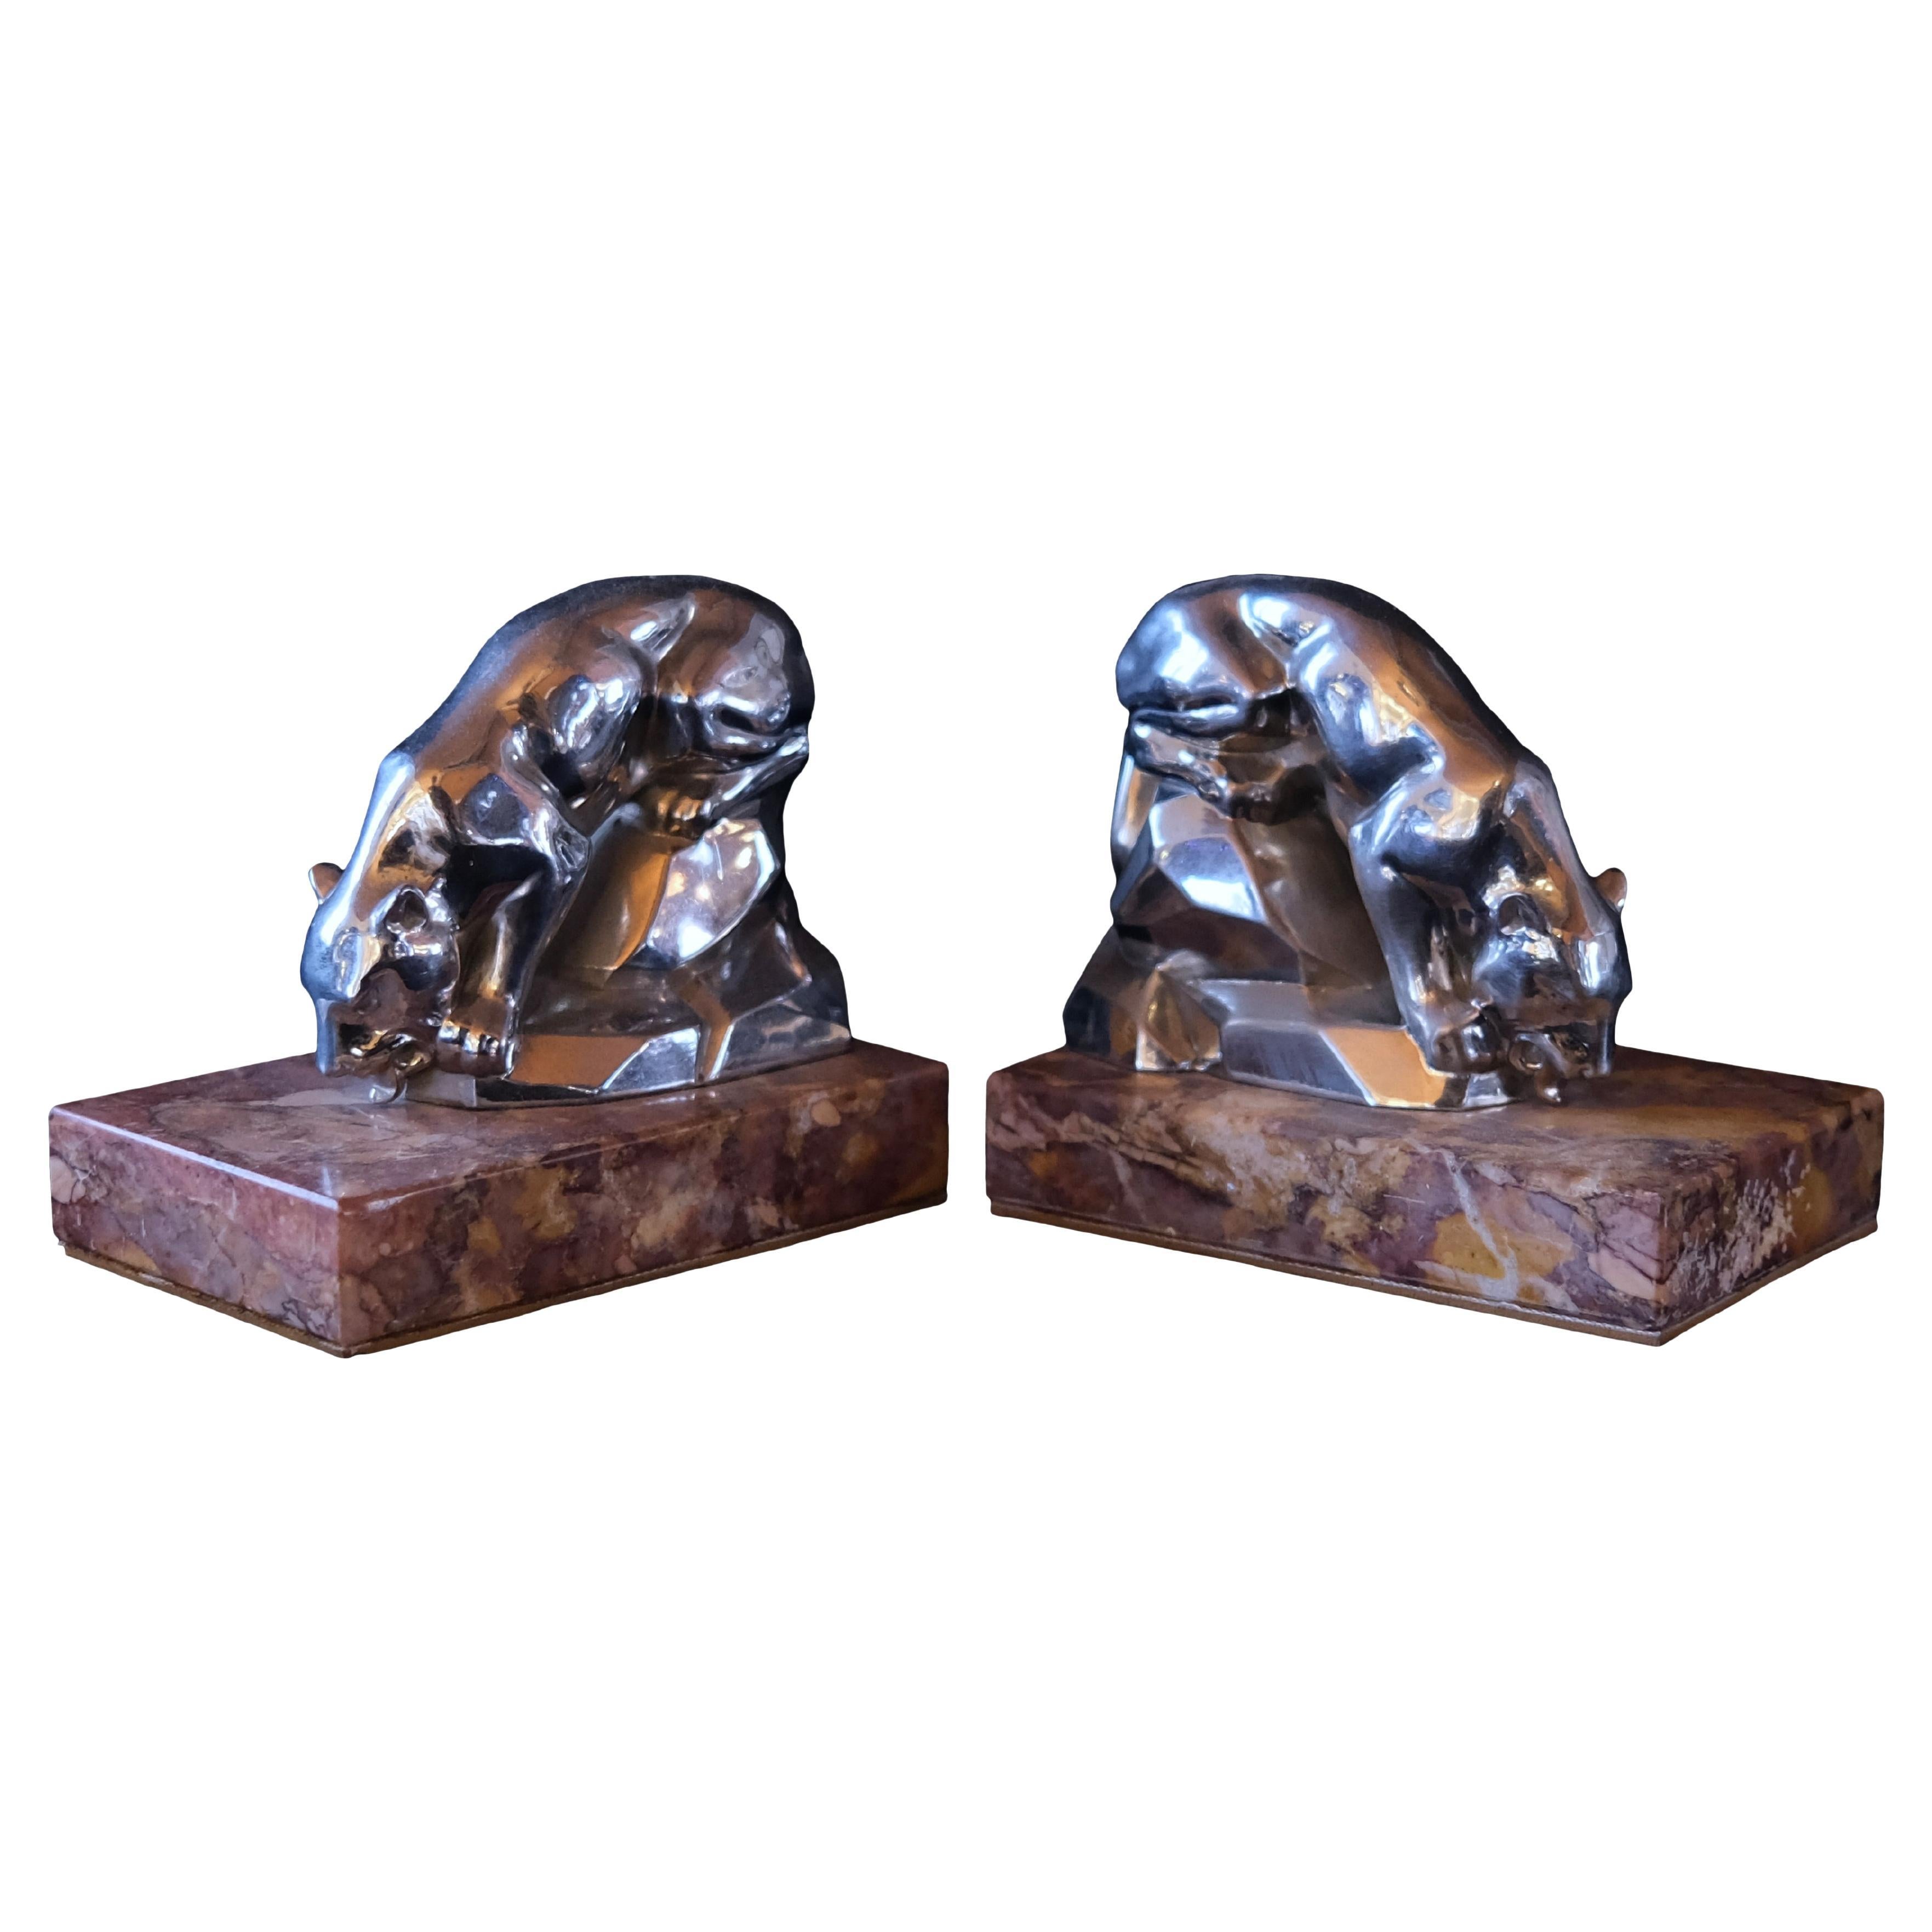 Polychromed Art Deco Bookends with Drinking Panthers on Red Marble, France 1930s